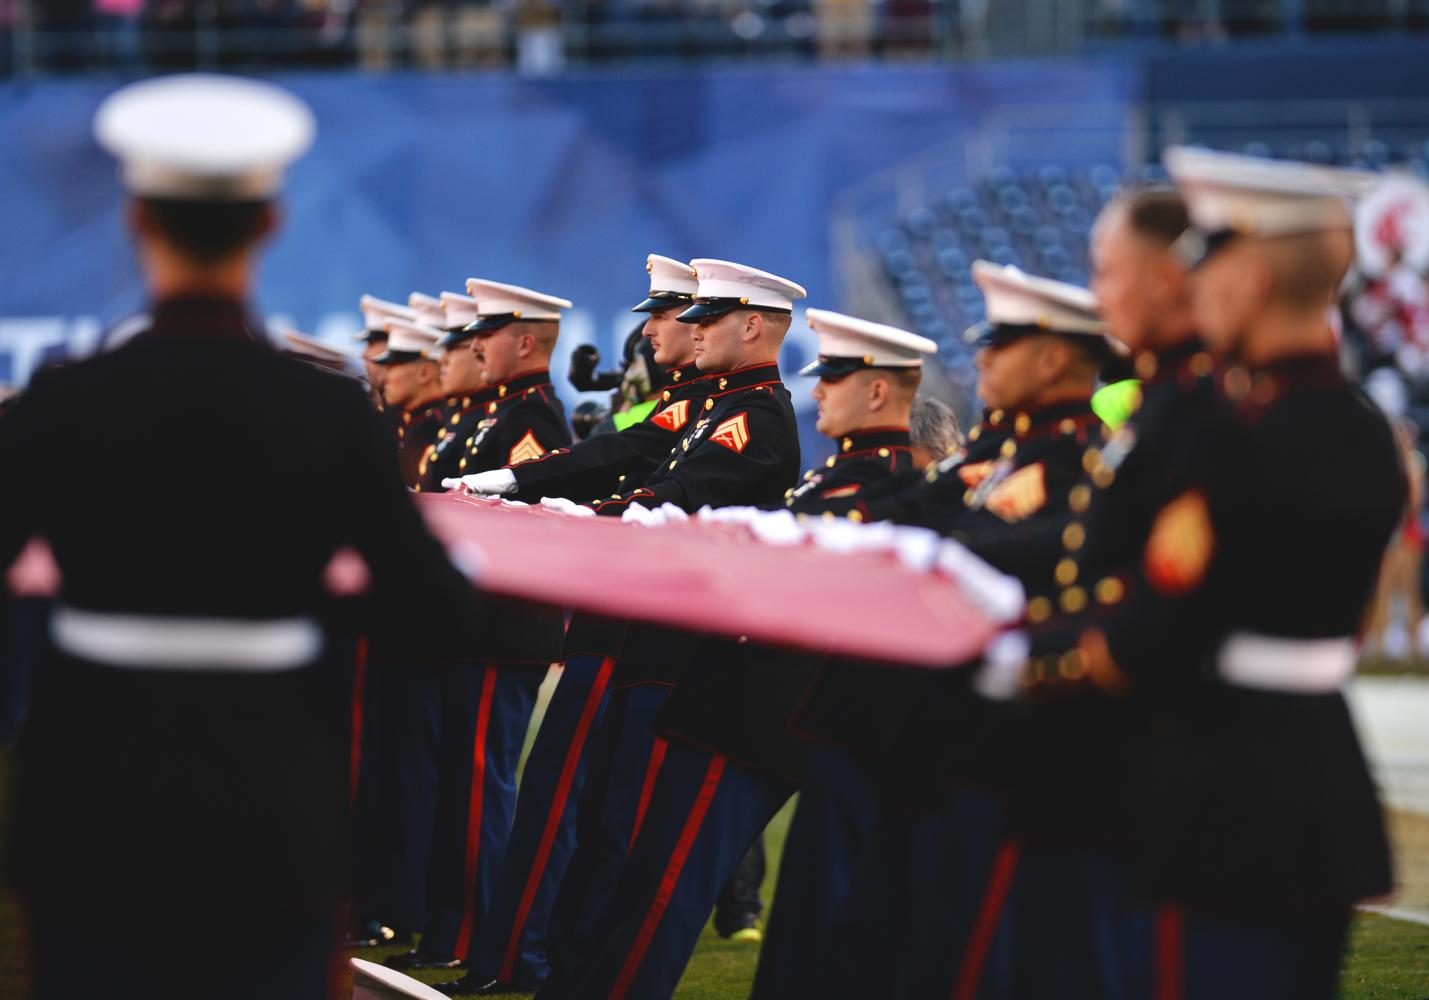 Members of the Marine Corps display the American flag during the Holiday Bowl pregame on December 27, 2016 at Qualcomm Stadium in San Diego, CA. 